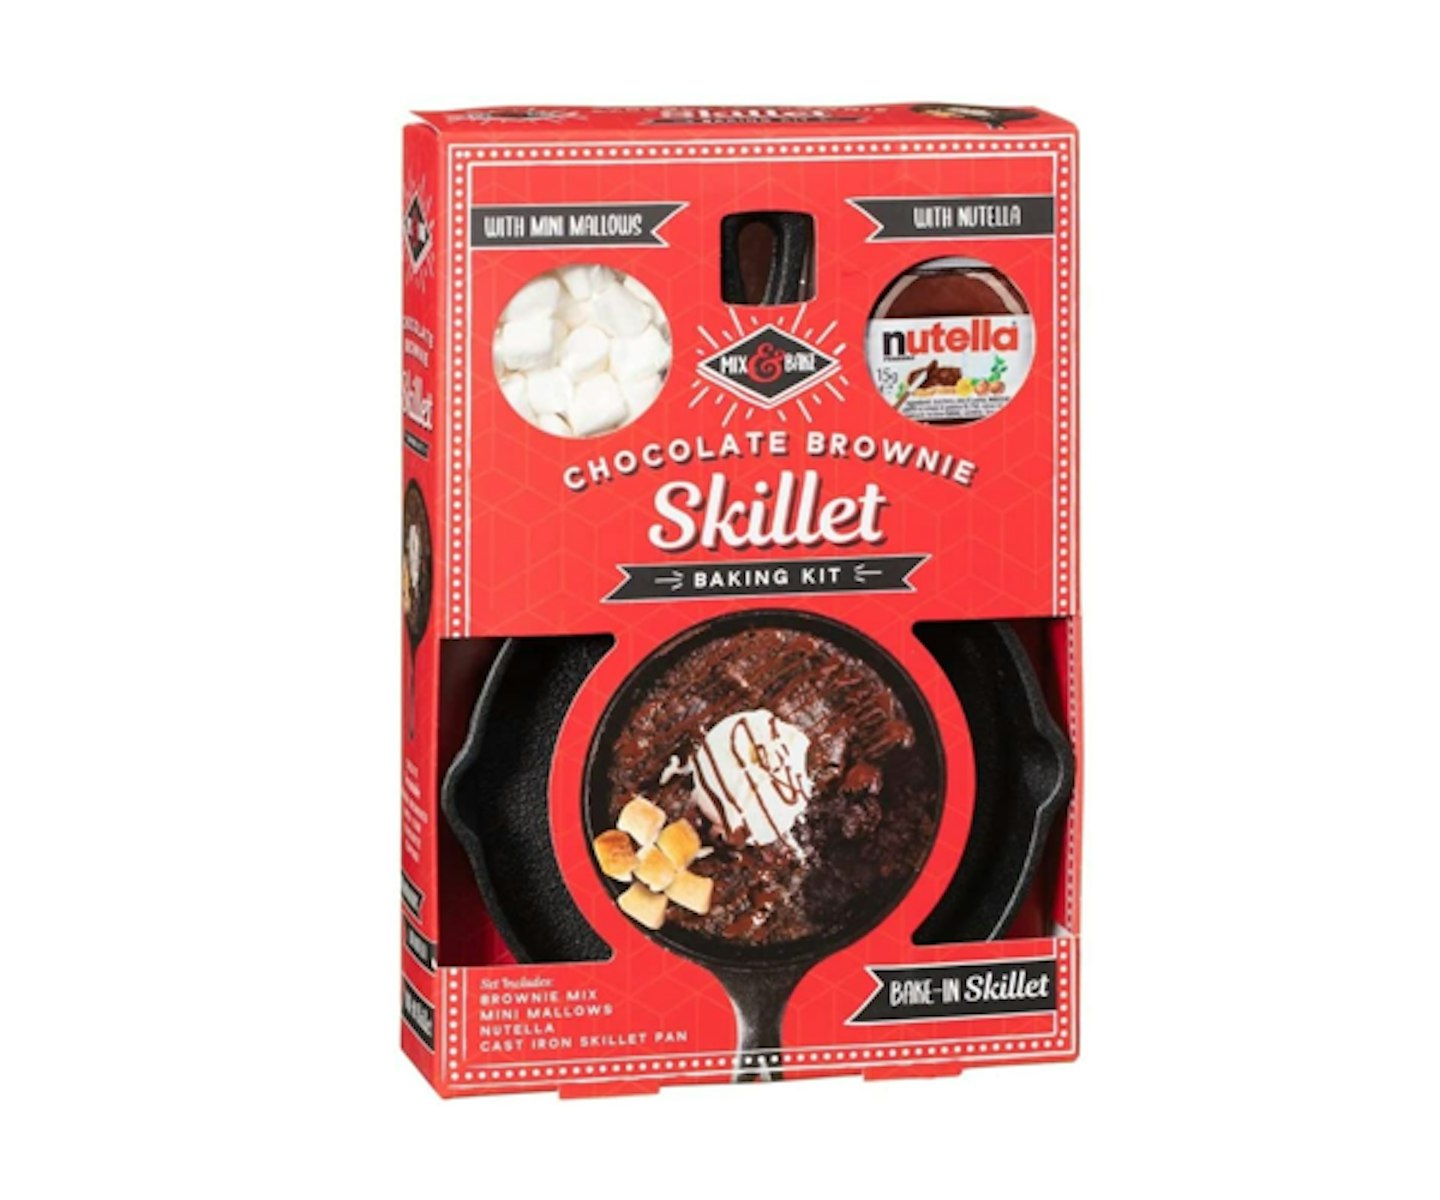 Nutella Chocolate Brownie Cast Iron Skillet Brownies Mix & Mallows Baking Kit